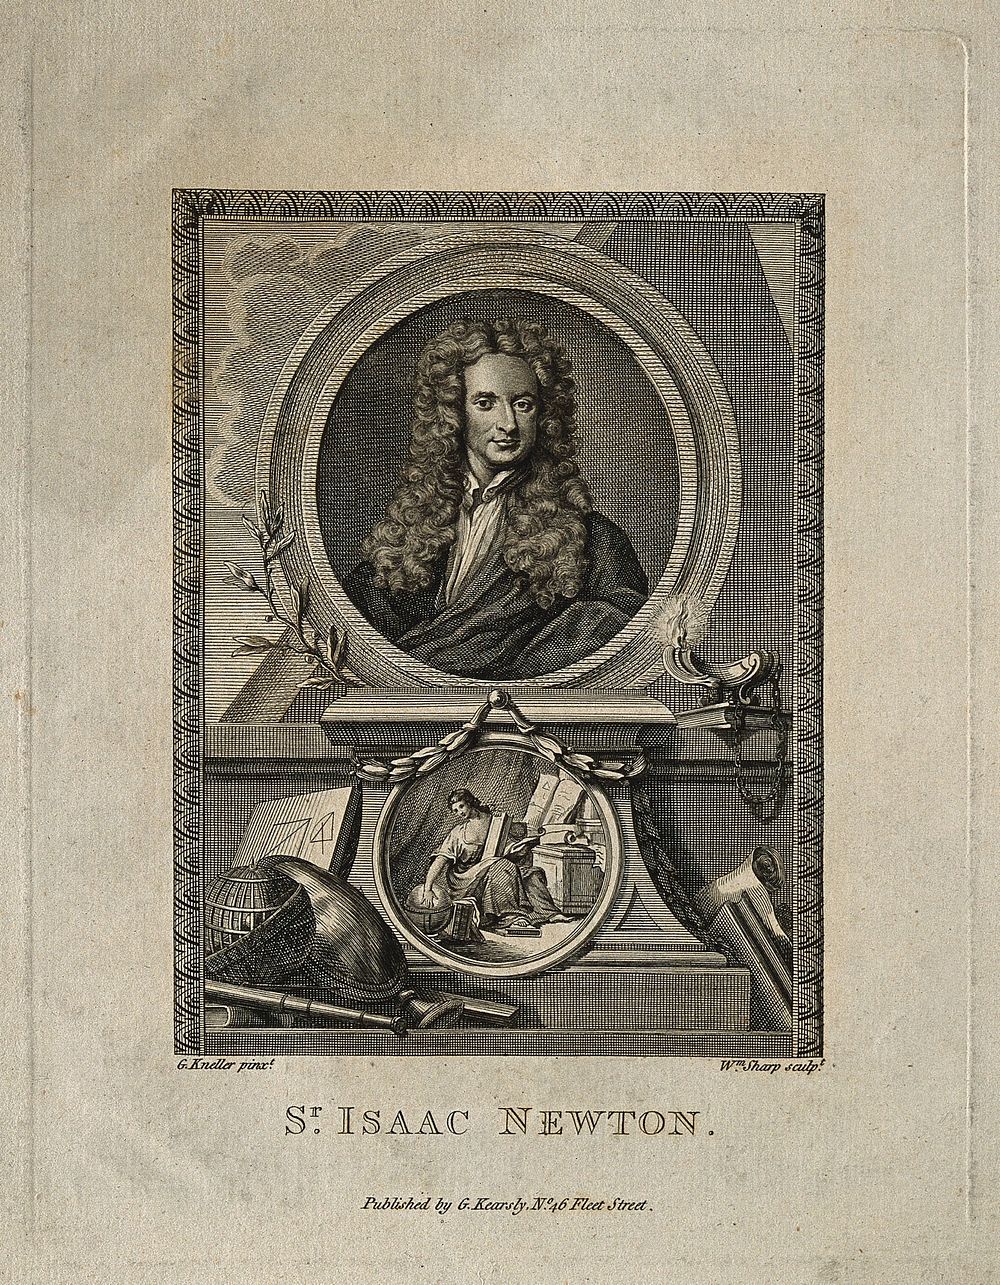 Sir Isaac Newton. Line engraving by W. Sharp after Sir G. Kneller, 1702.